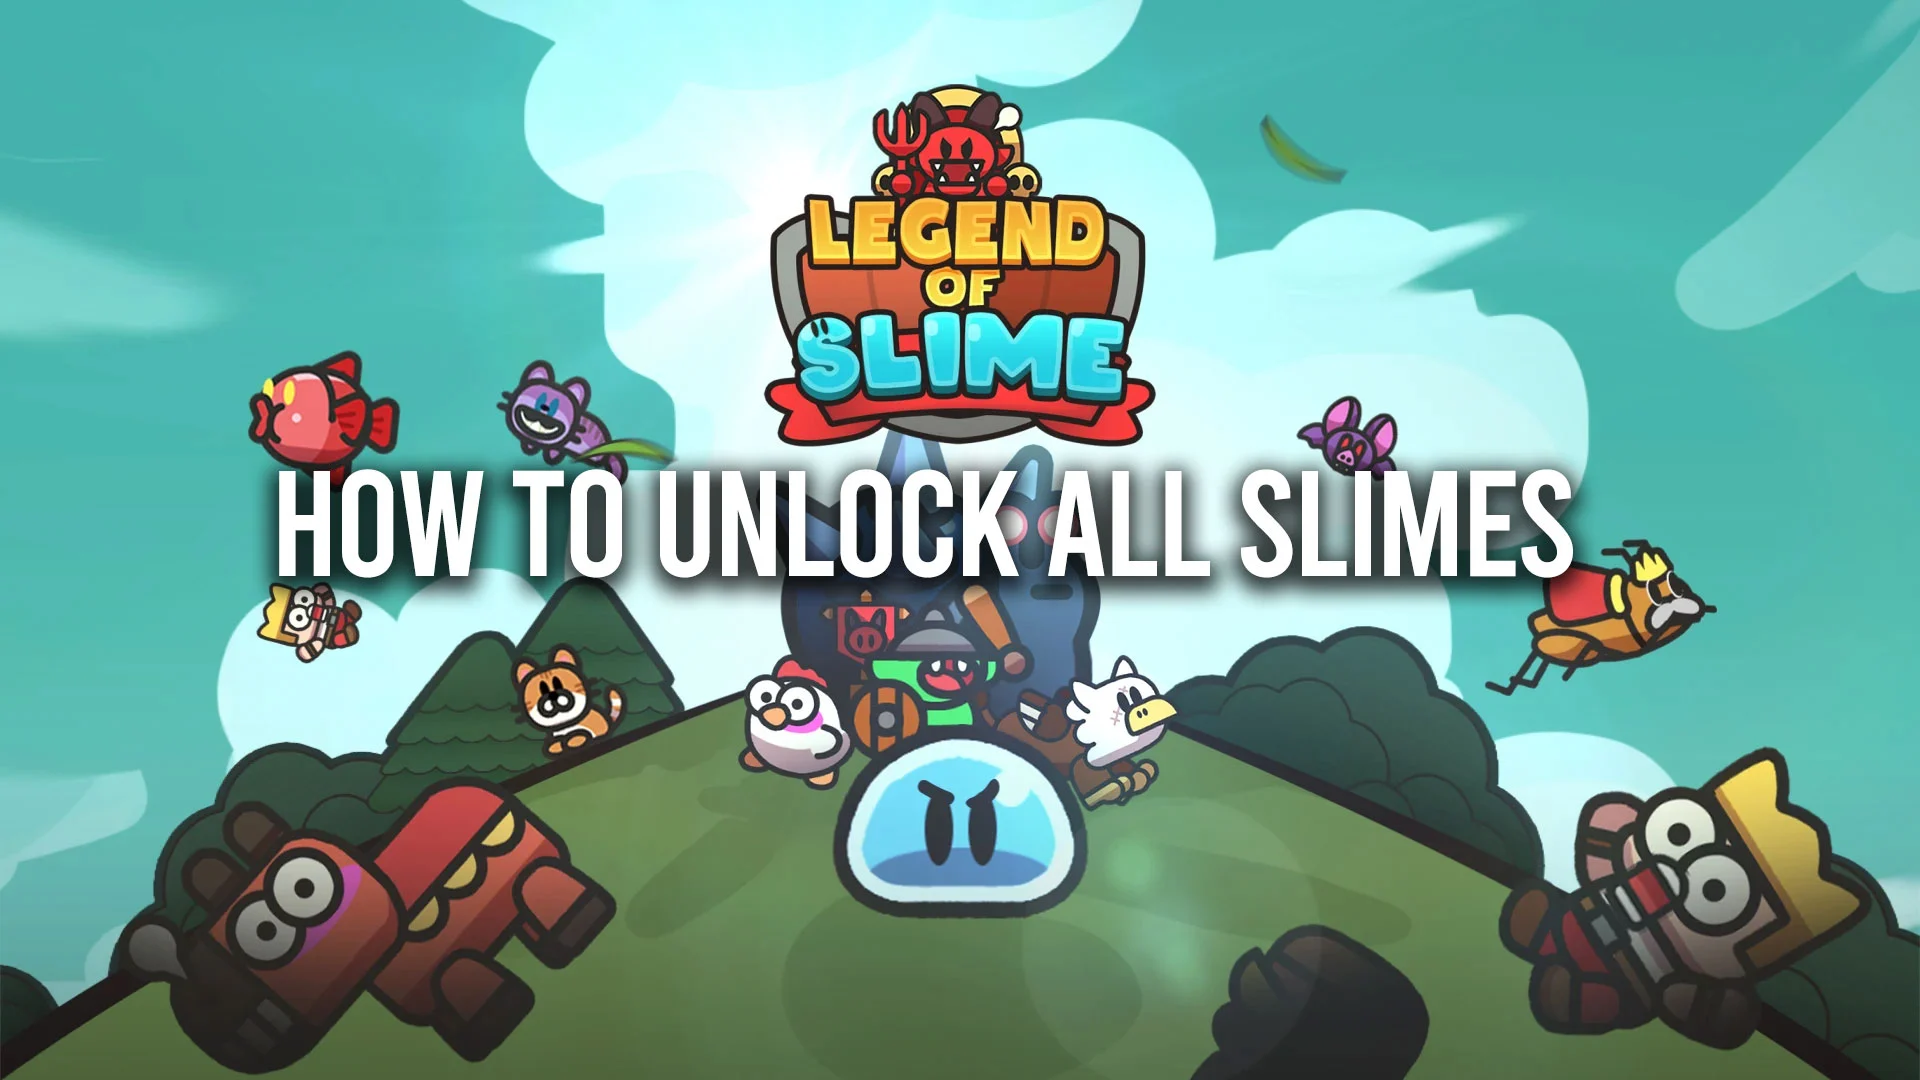 All Slimes in Legend of Slime and How to Unlock